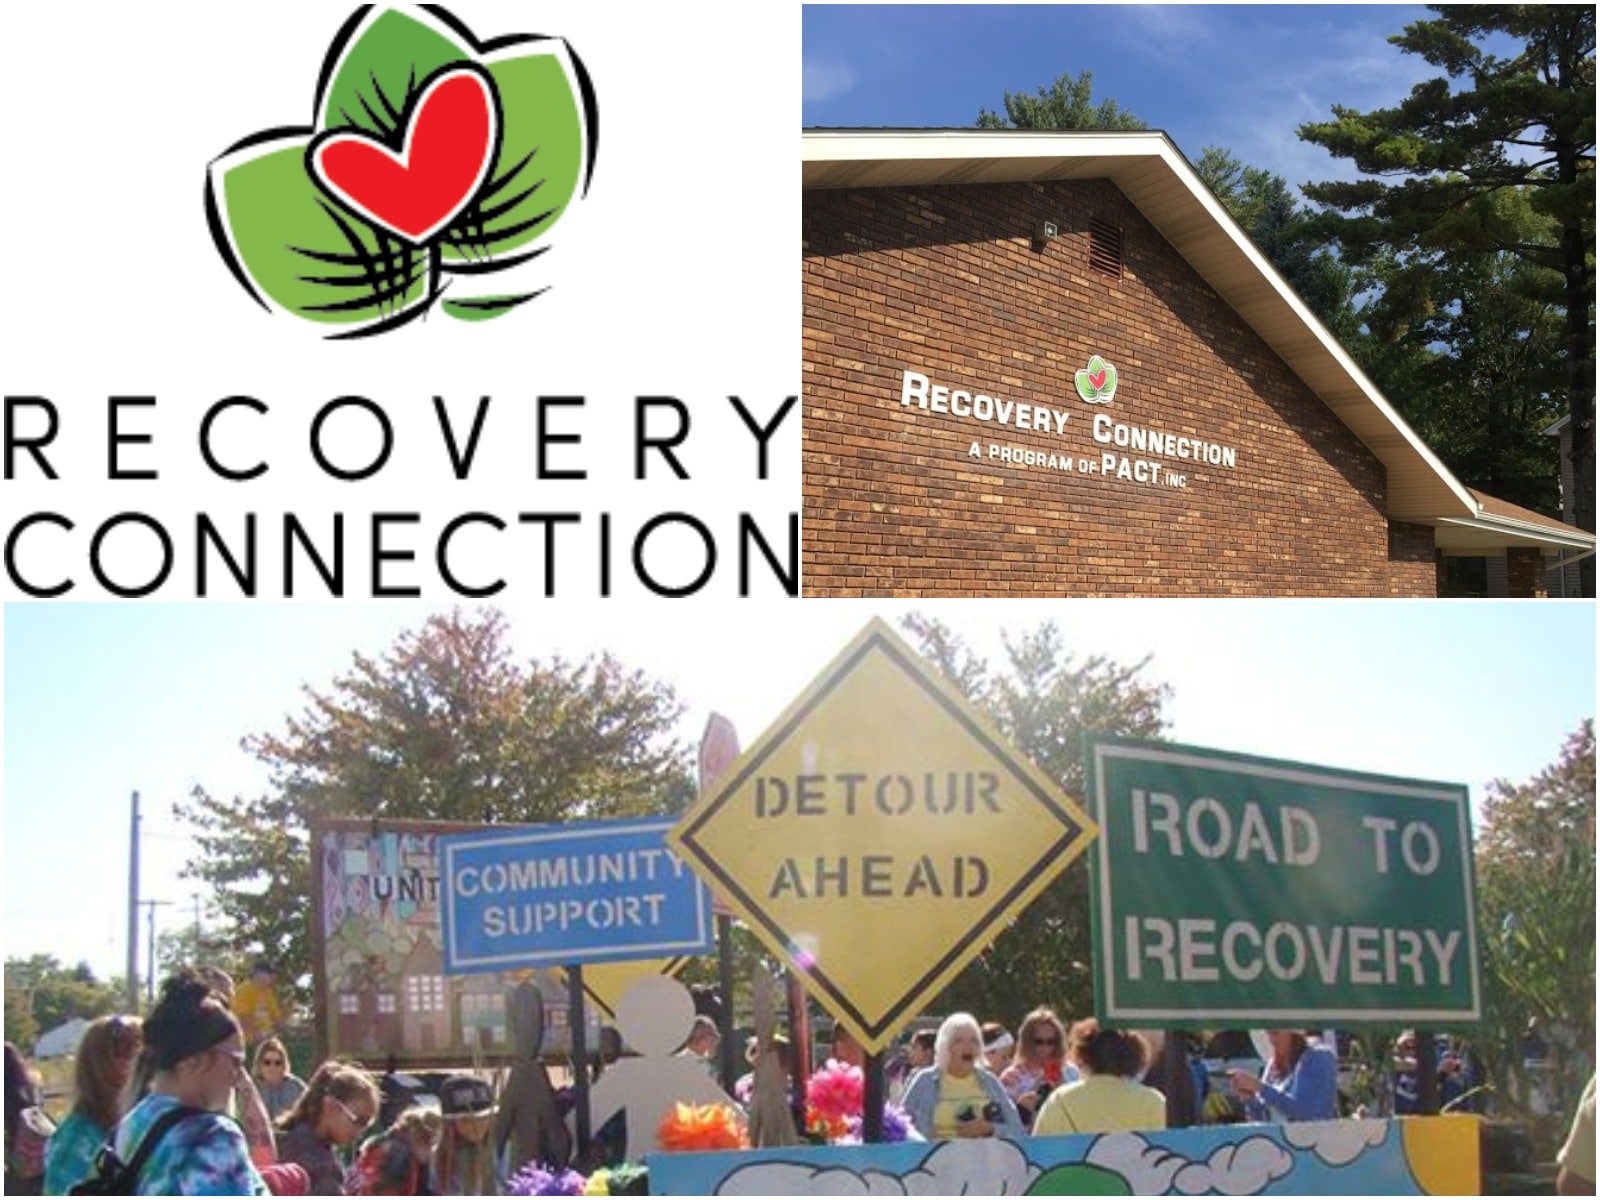 Recovery Connection creates culture of healing